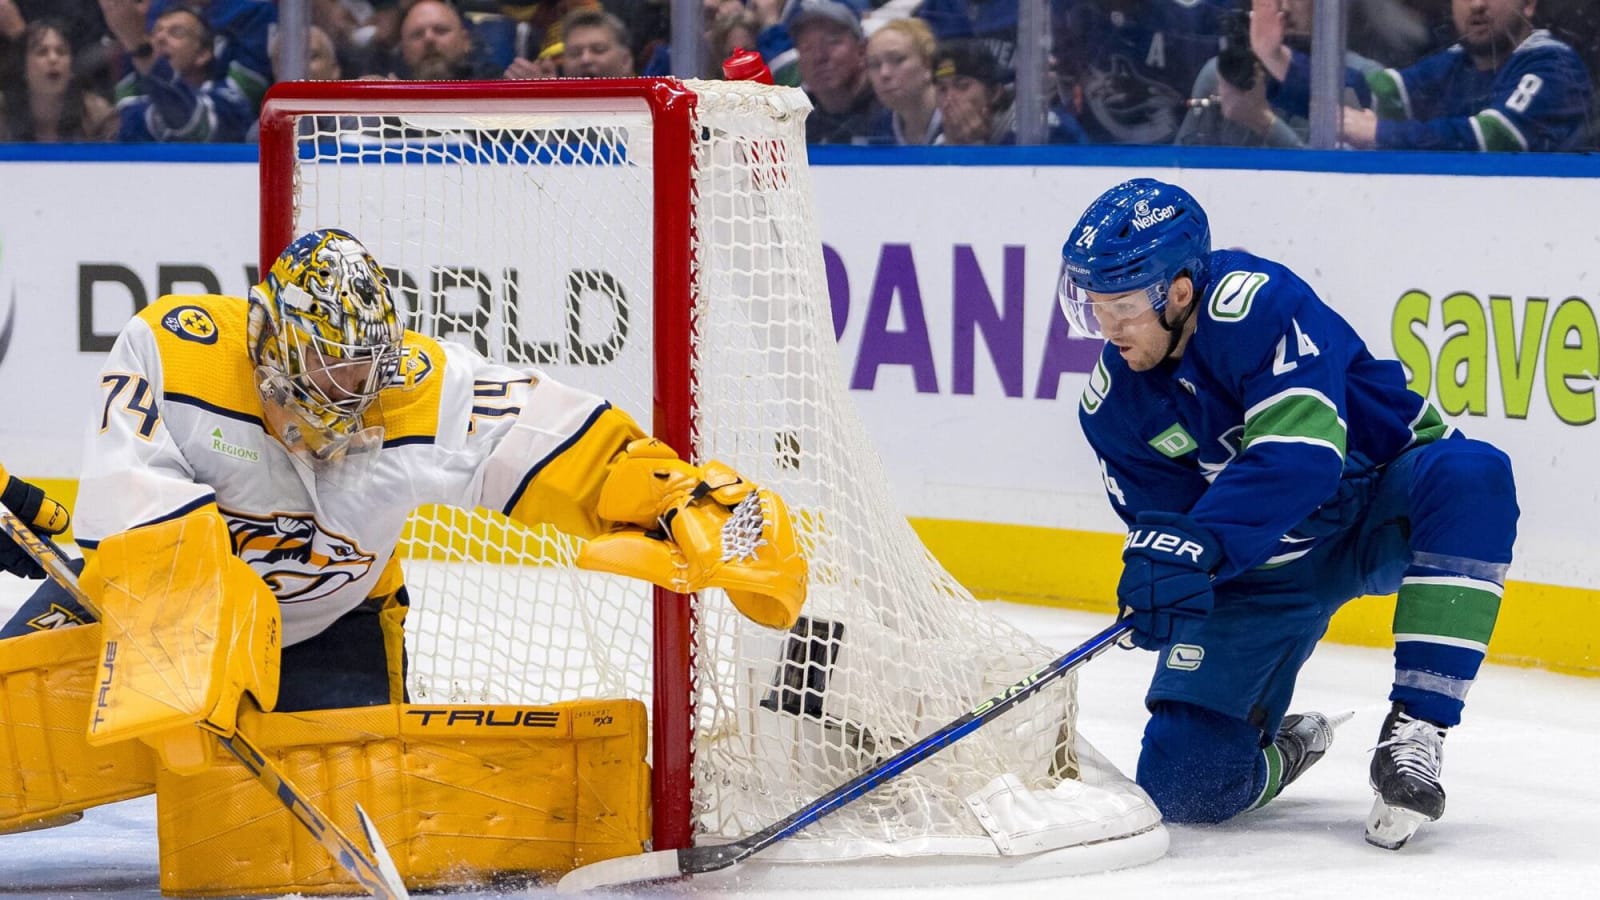 Game 2 between the Canucks and Predators shows why advanced stats matter…and why they don’t